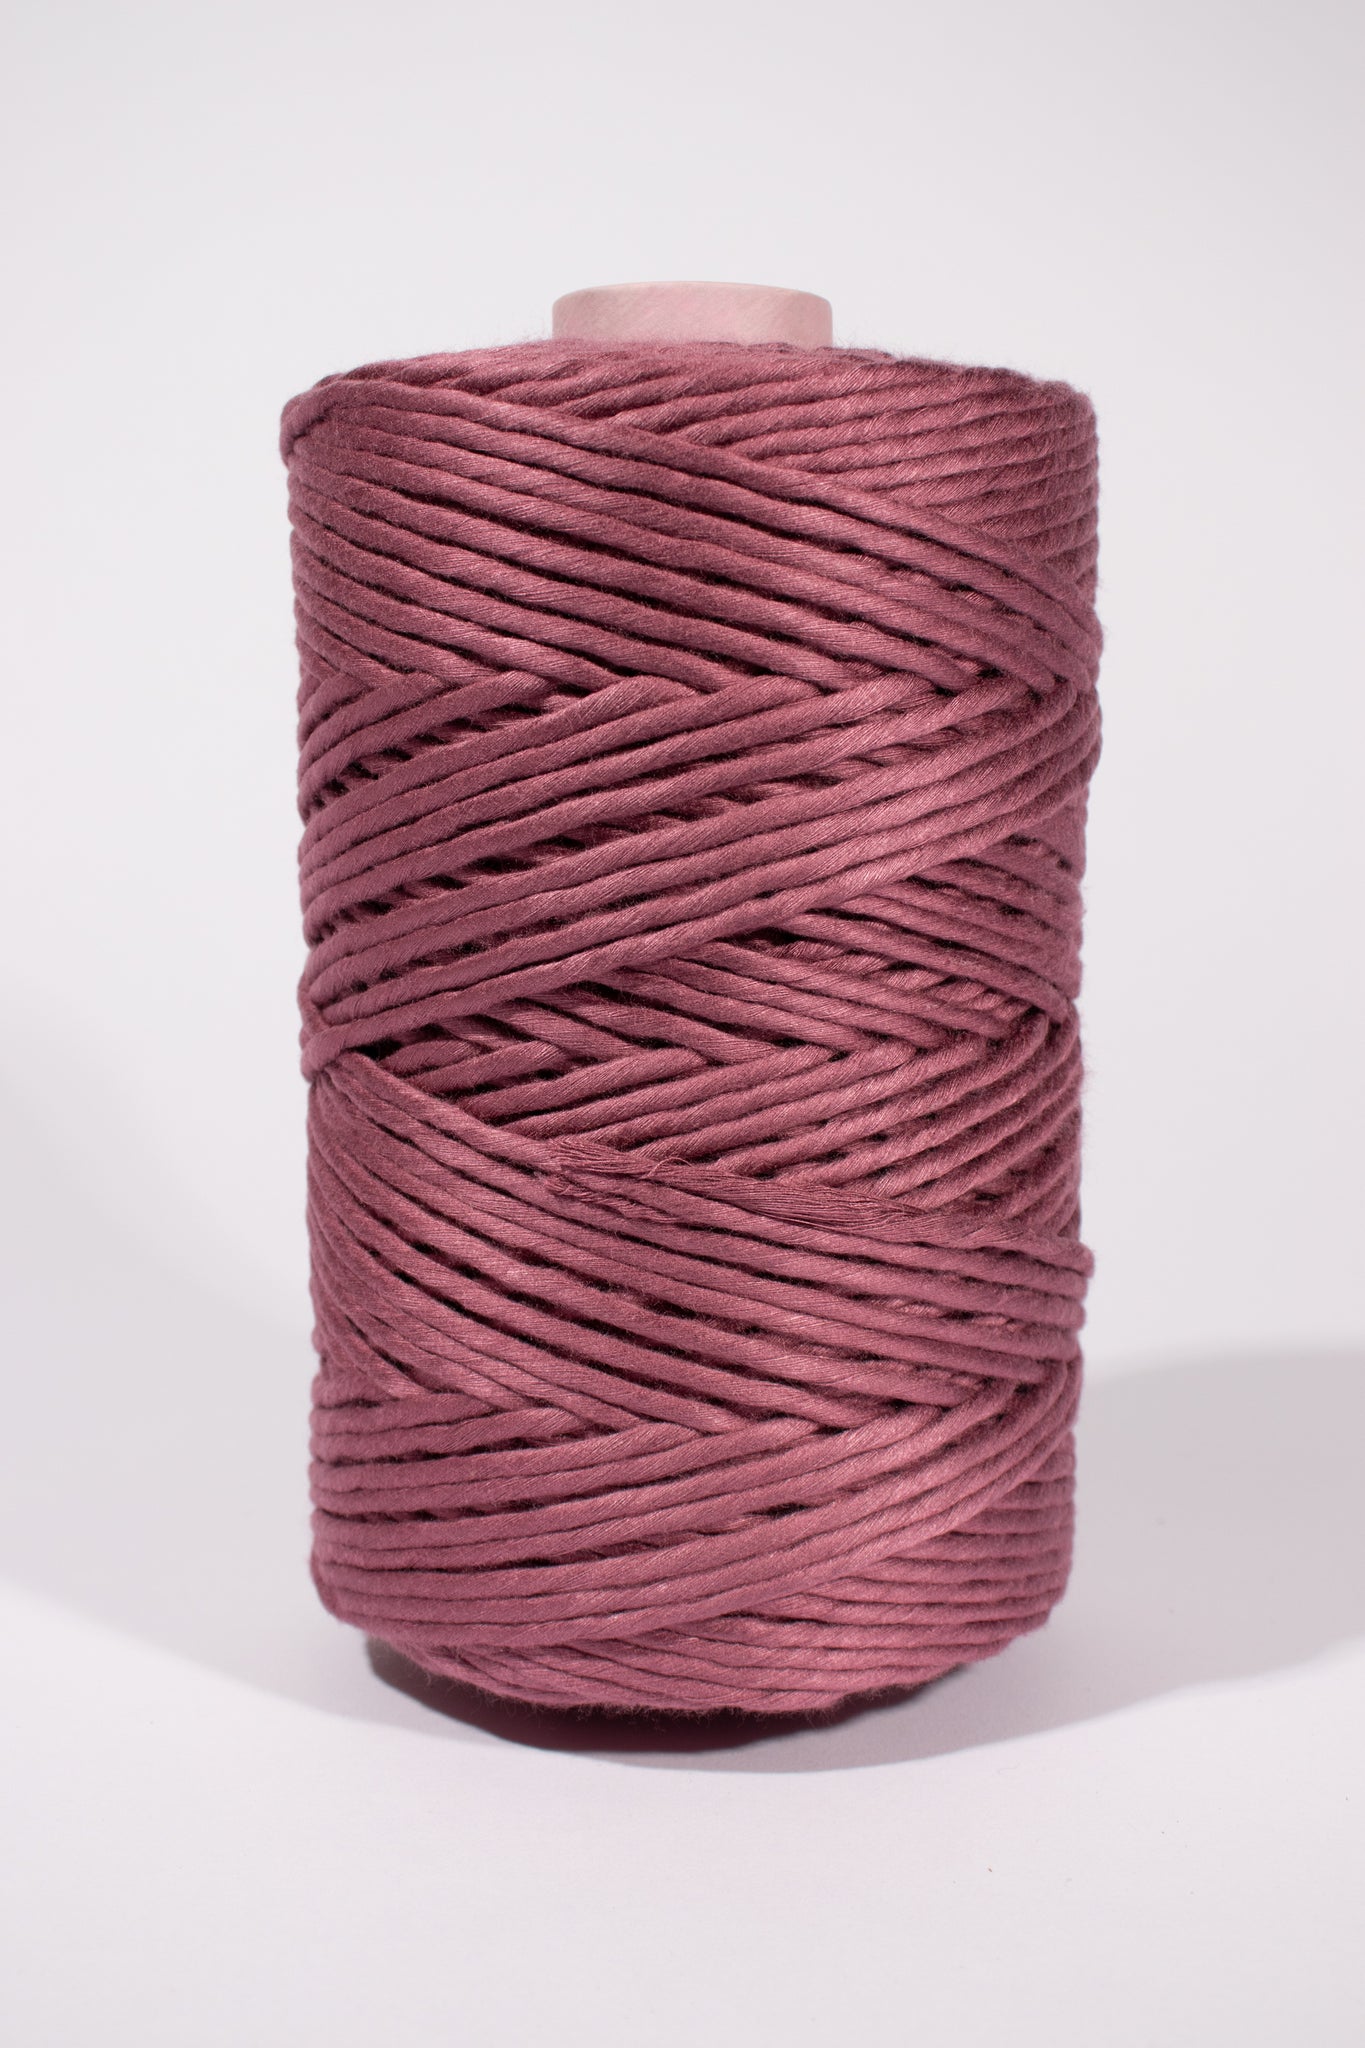 5mm bamboo super soft string for macrame - mulberry